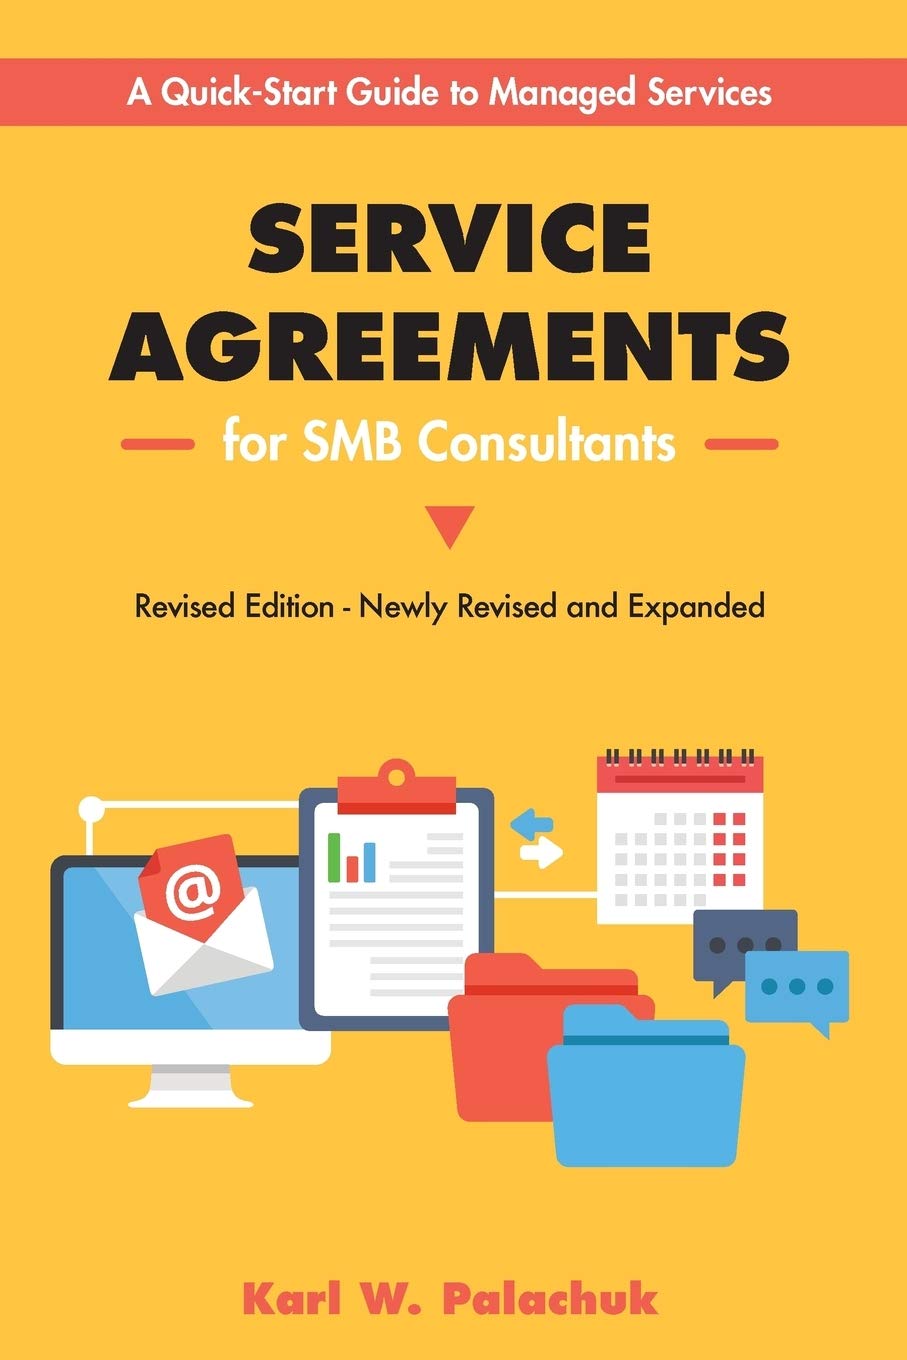 Service Agreements For SMB Consultants - Revised Edition: A Quick-Start Guide To Managed Services 
